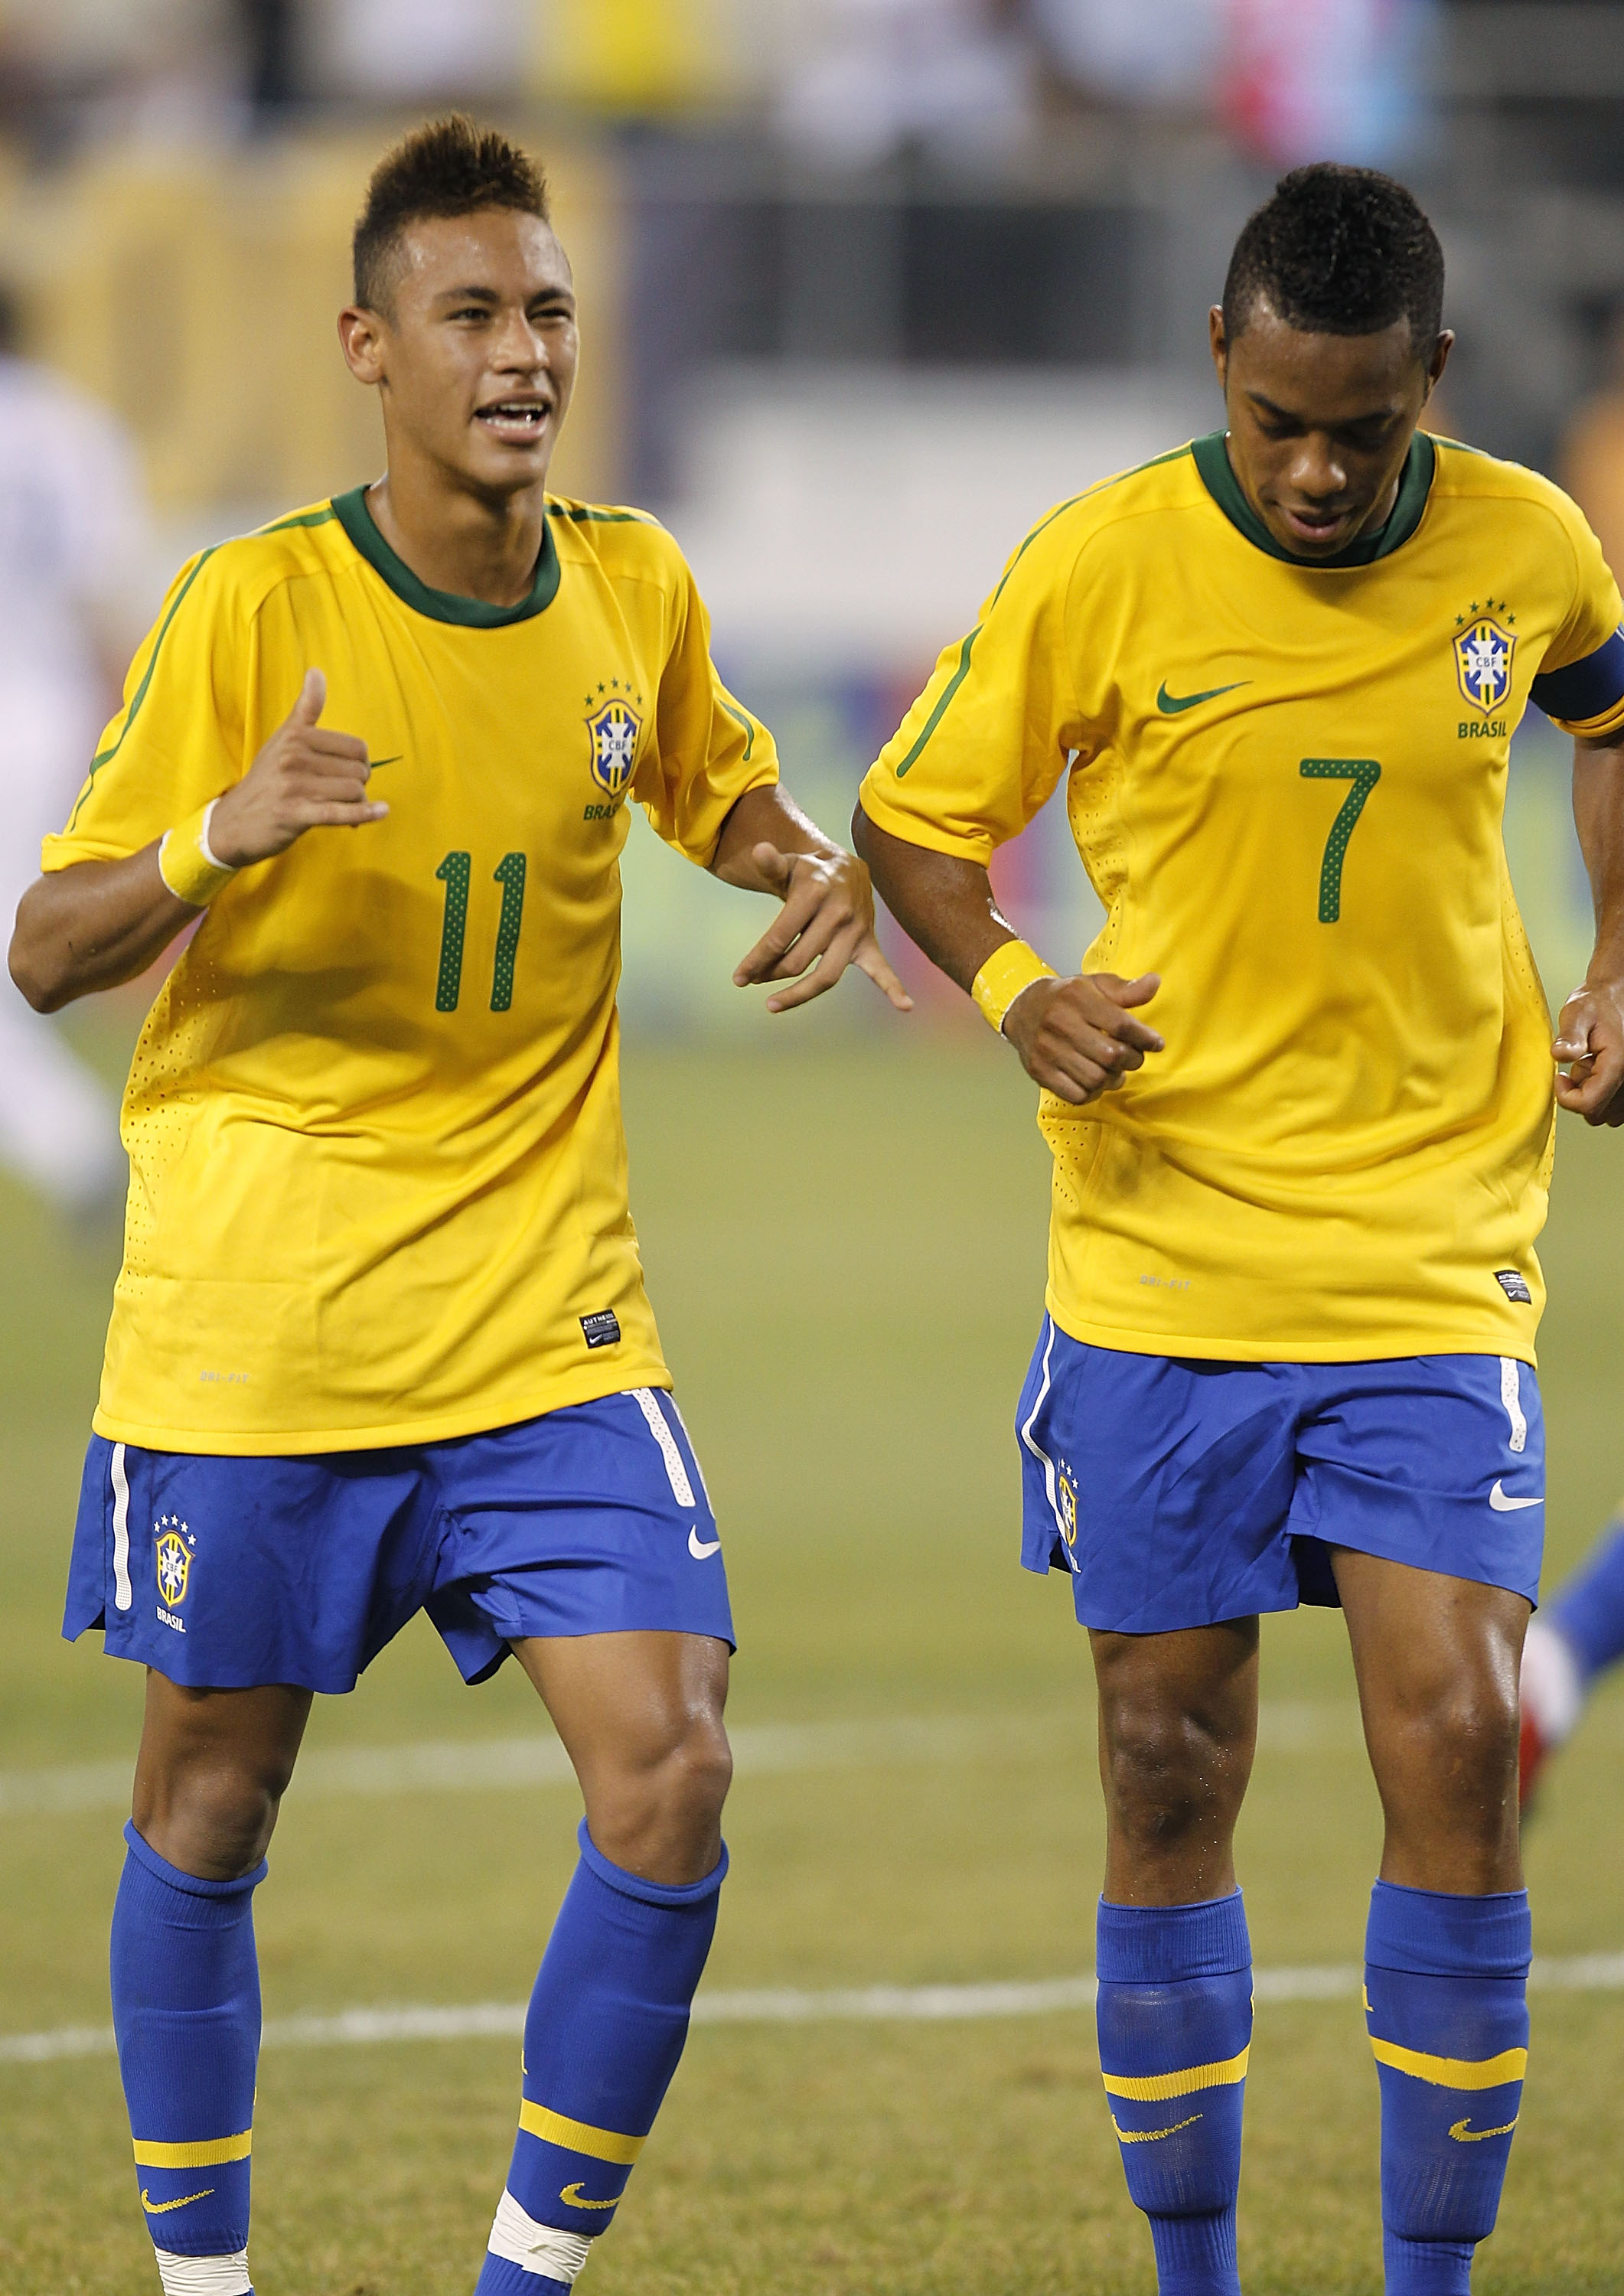 EAST RUTHERFORD, NJ - AUGUST 10: Neymar #11 and Robinho #7 of Brazil celebrate Neymar's goal against the U.S. in the first half of a friendly match at the New Meadowlands on August 10, 2010 in East Rutherford, New Jersey. (Photo by Jeff Zelevansky/Getty I